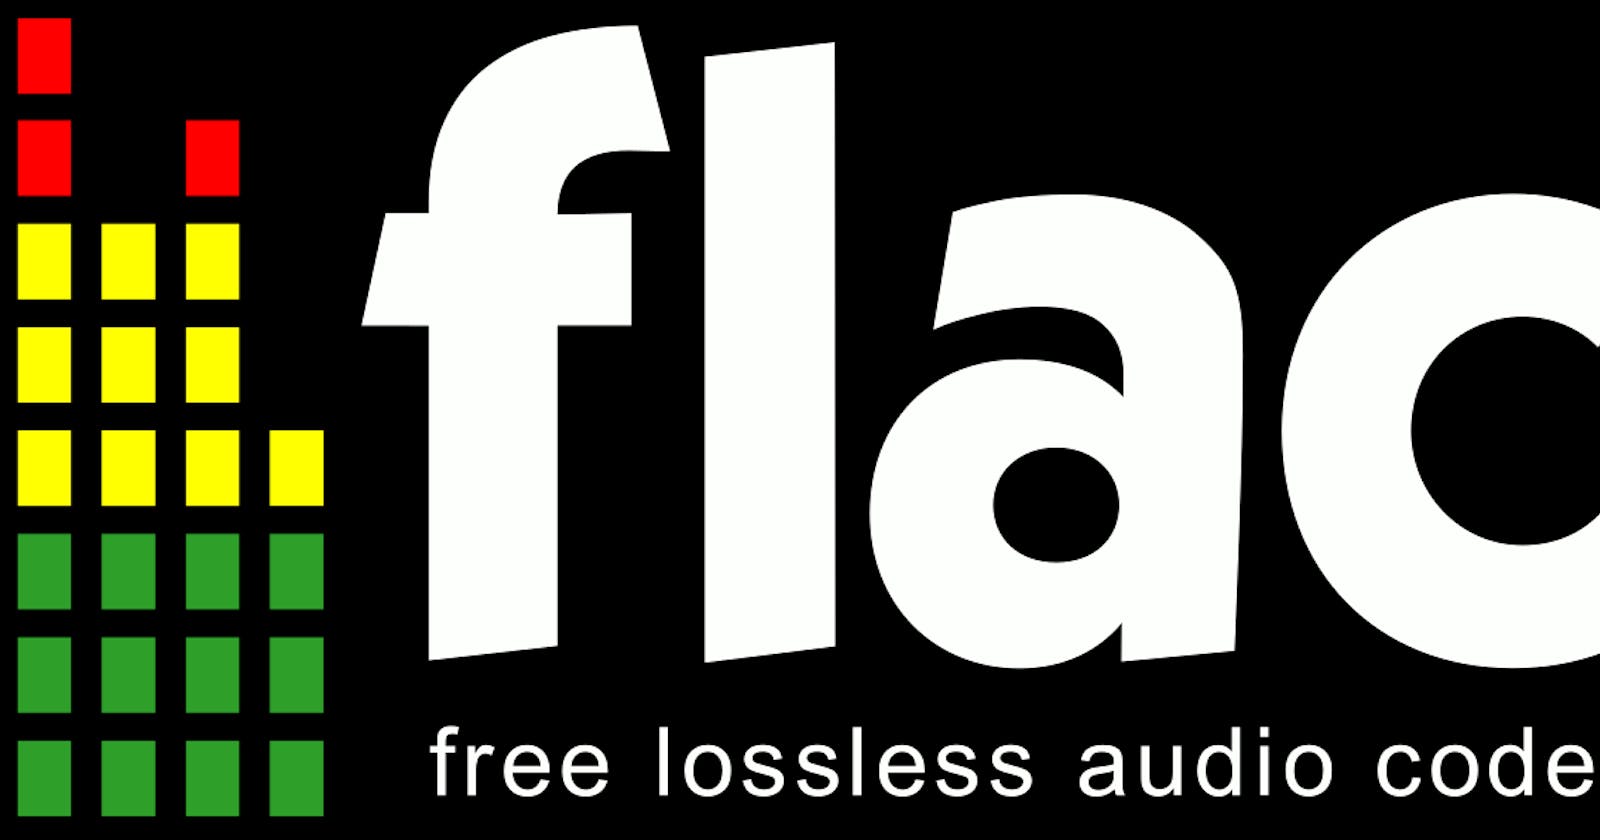 Play FLAC files on Symbian 5th edition mobile phones